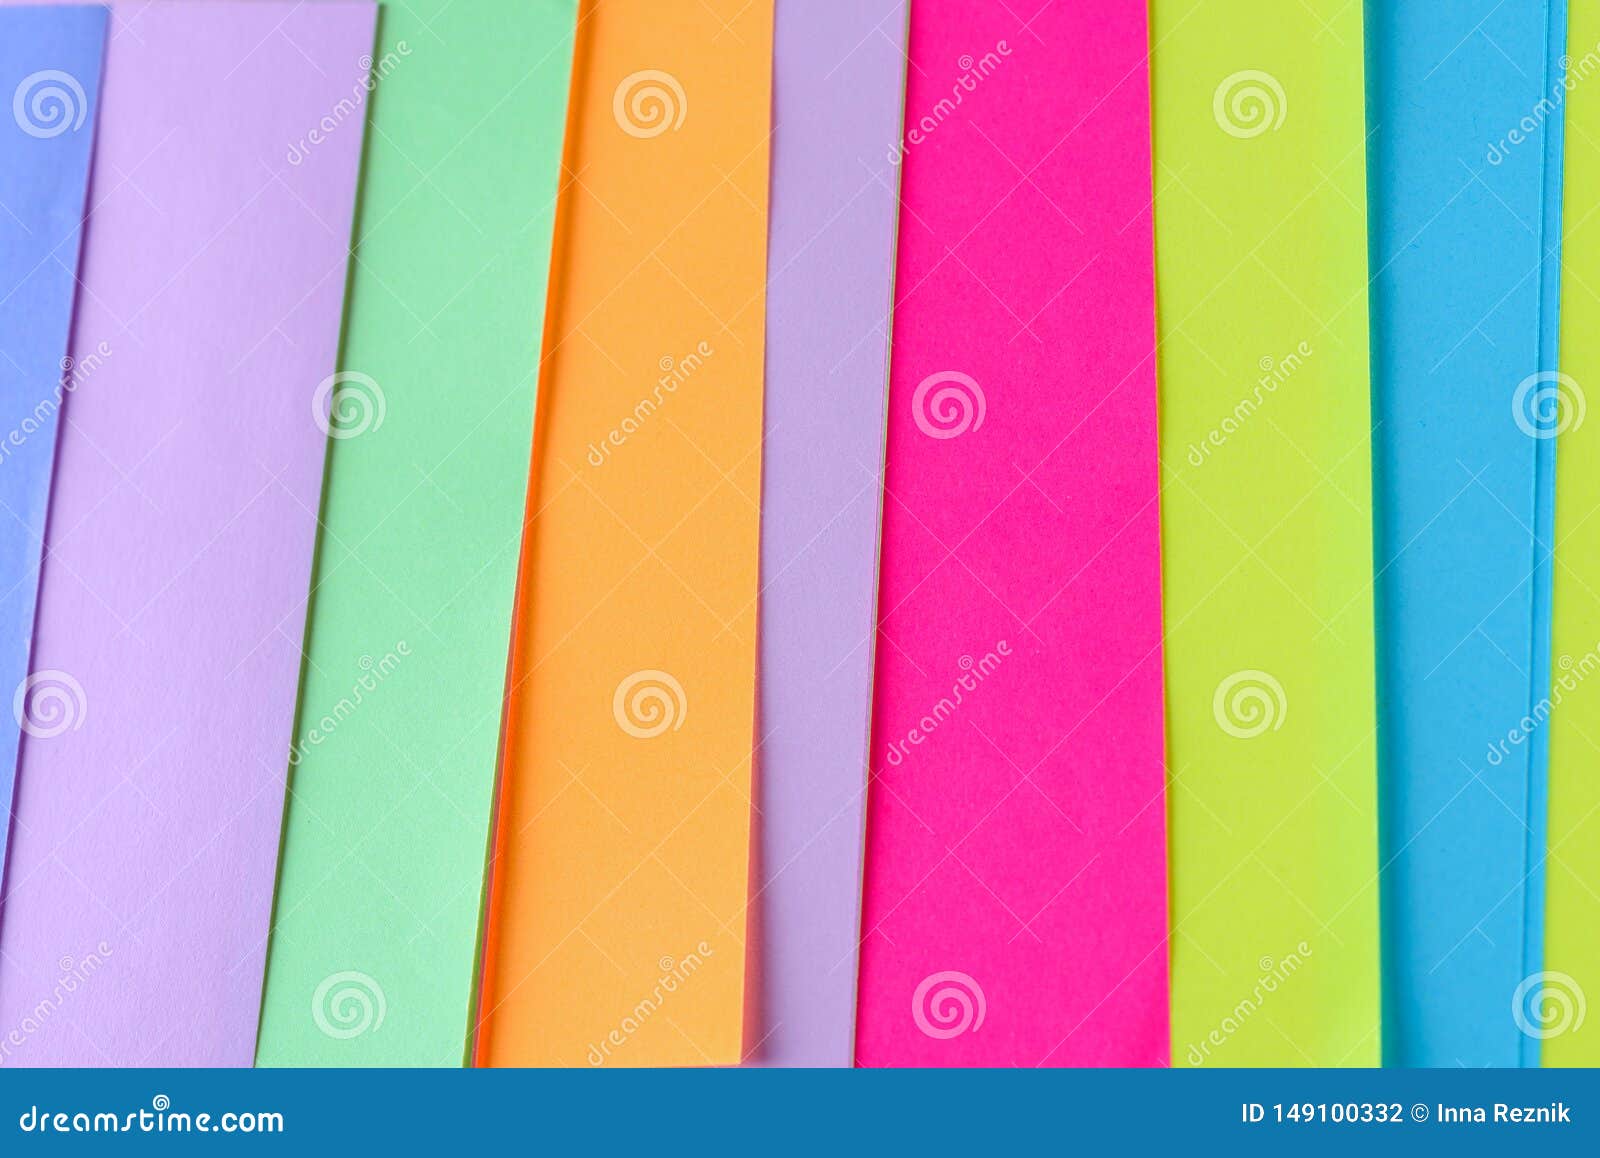 Colorful Neon Paper Background. Striped Geometric Pattern of Bright Colors.  Stock Photo - Image of neon, fashion: 149100332